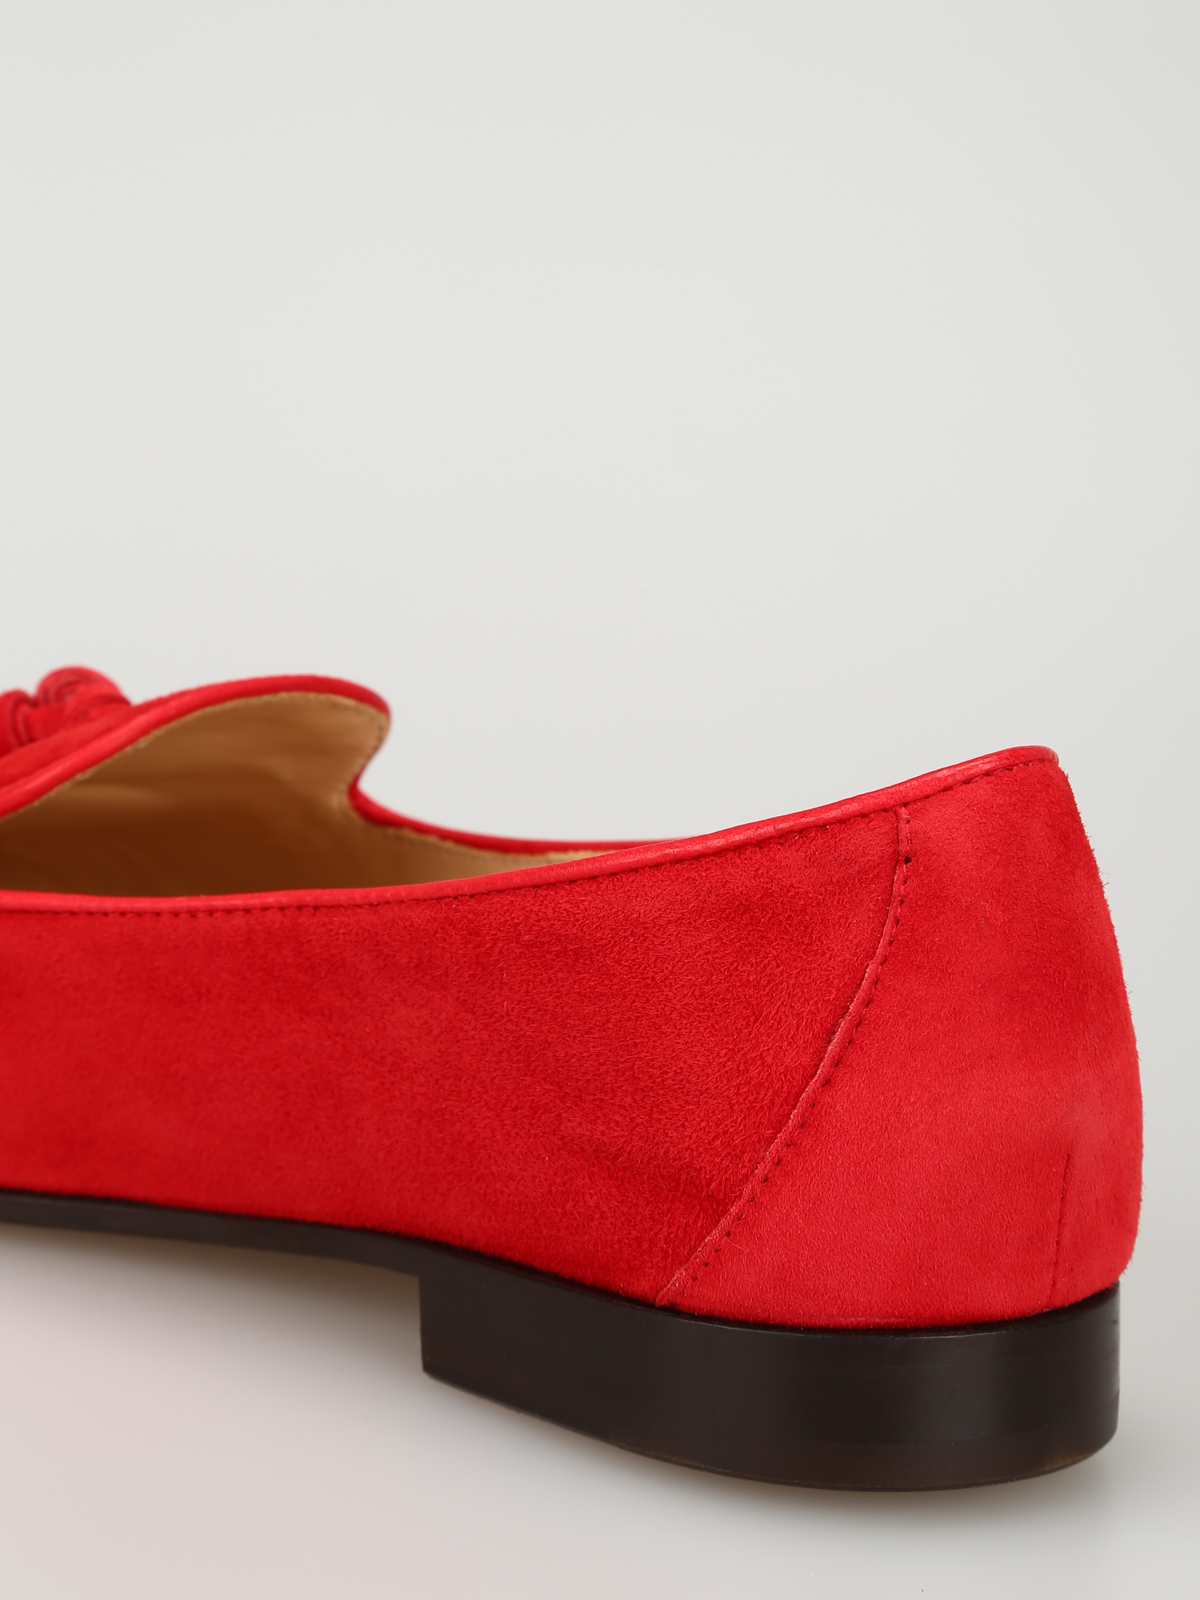 bright red loafers